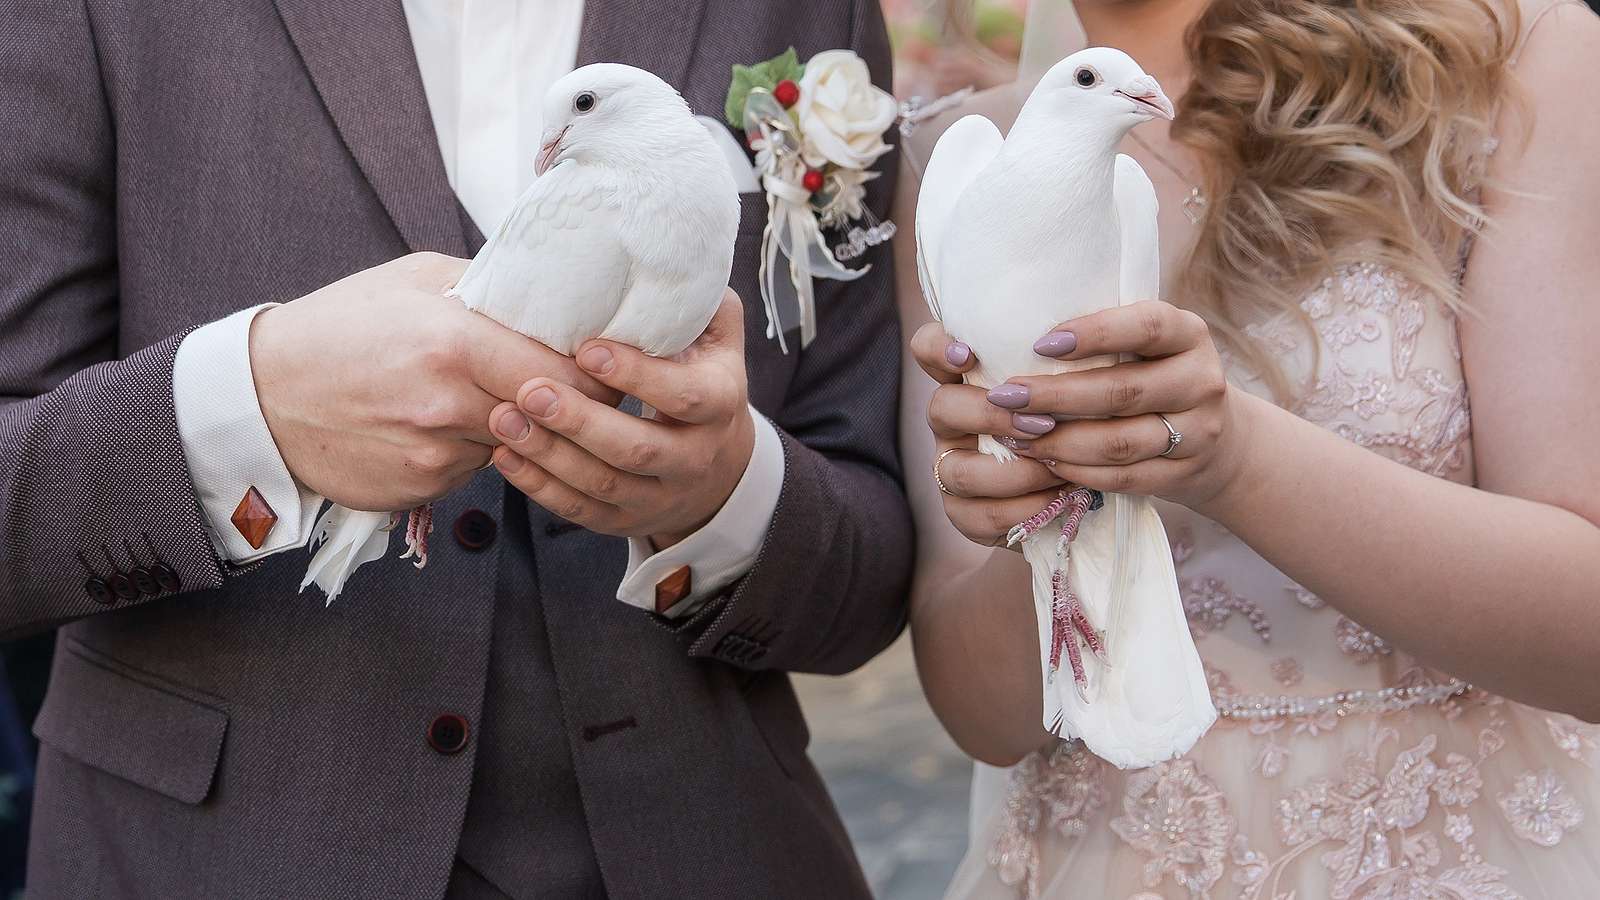 We're Members of the National Dove Registry